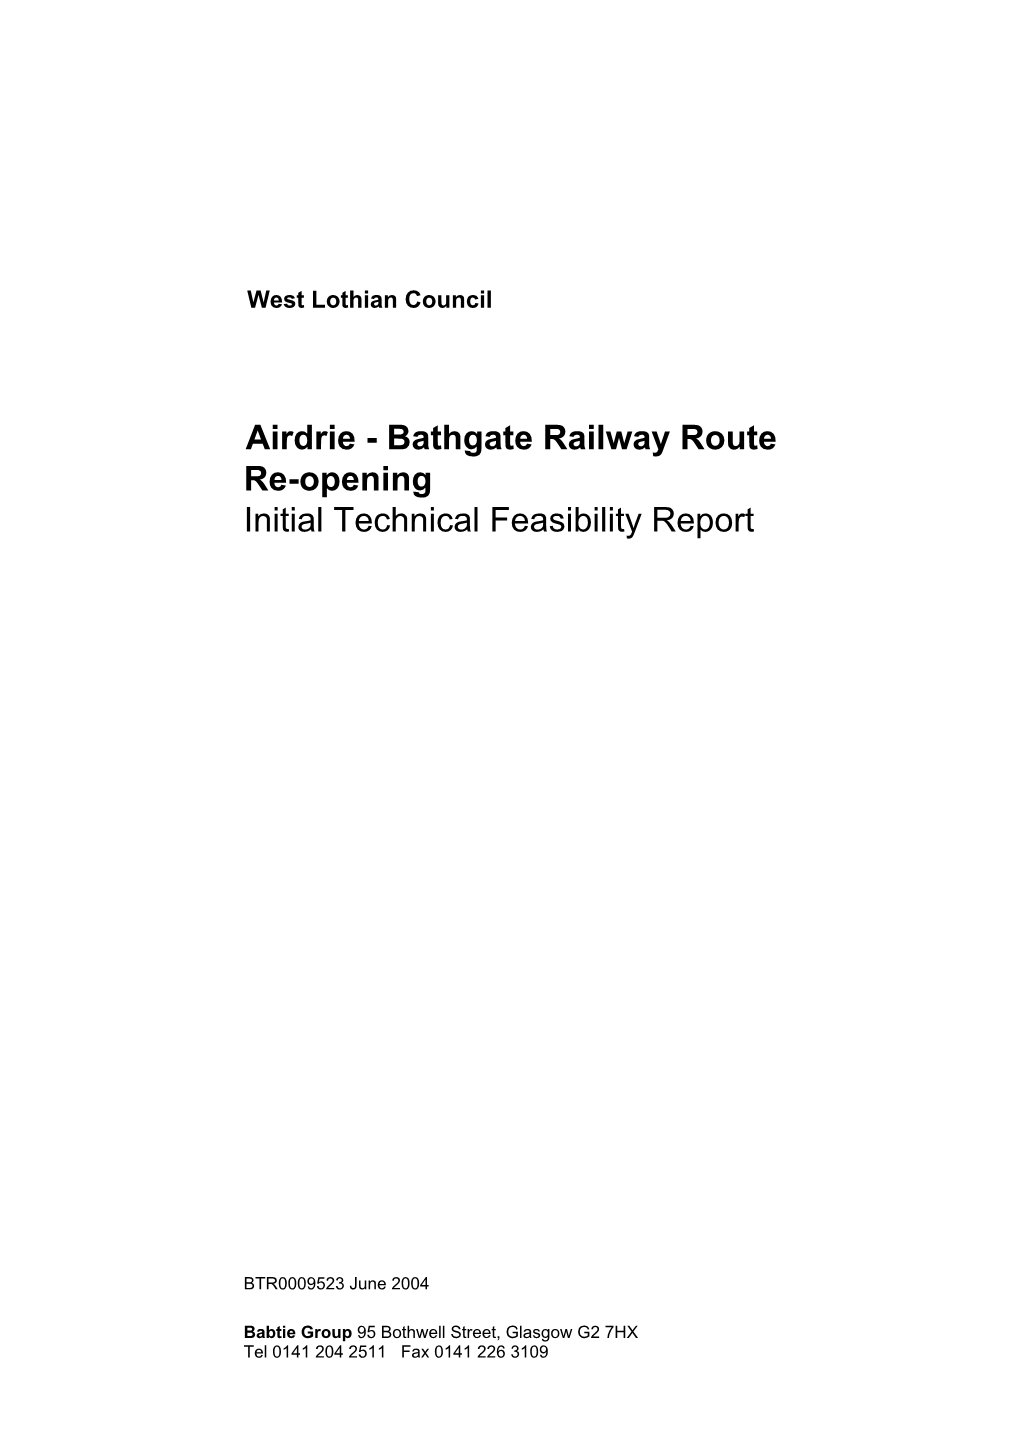 Airdrie – Bathgate Technical Feasibility Report